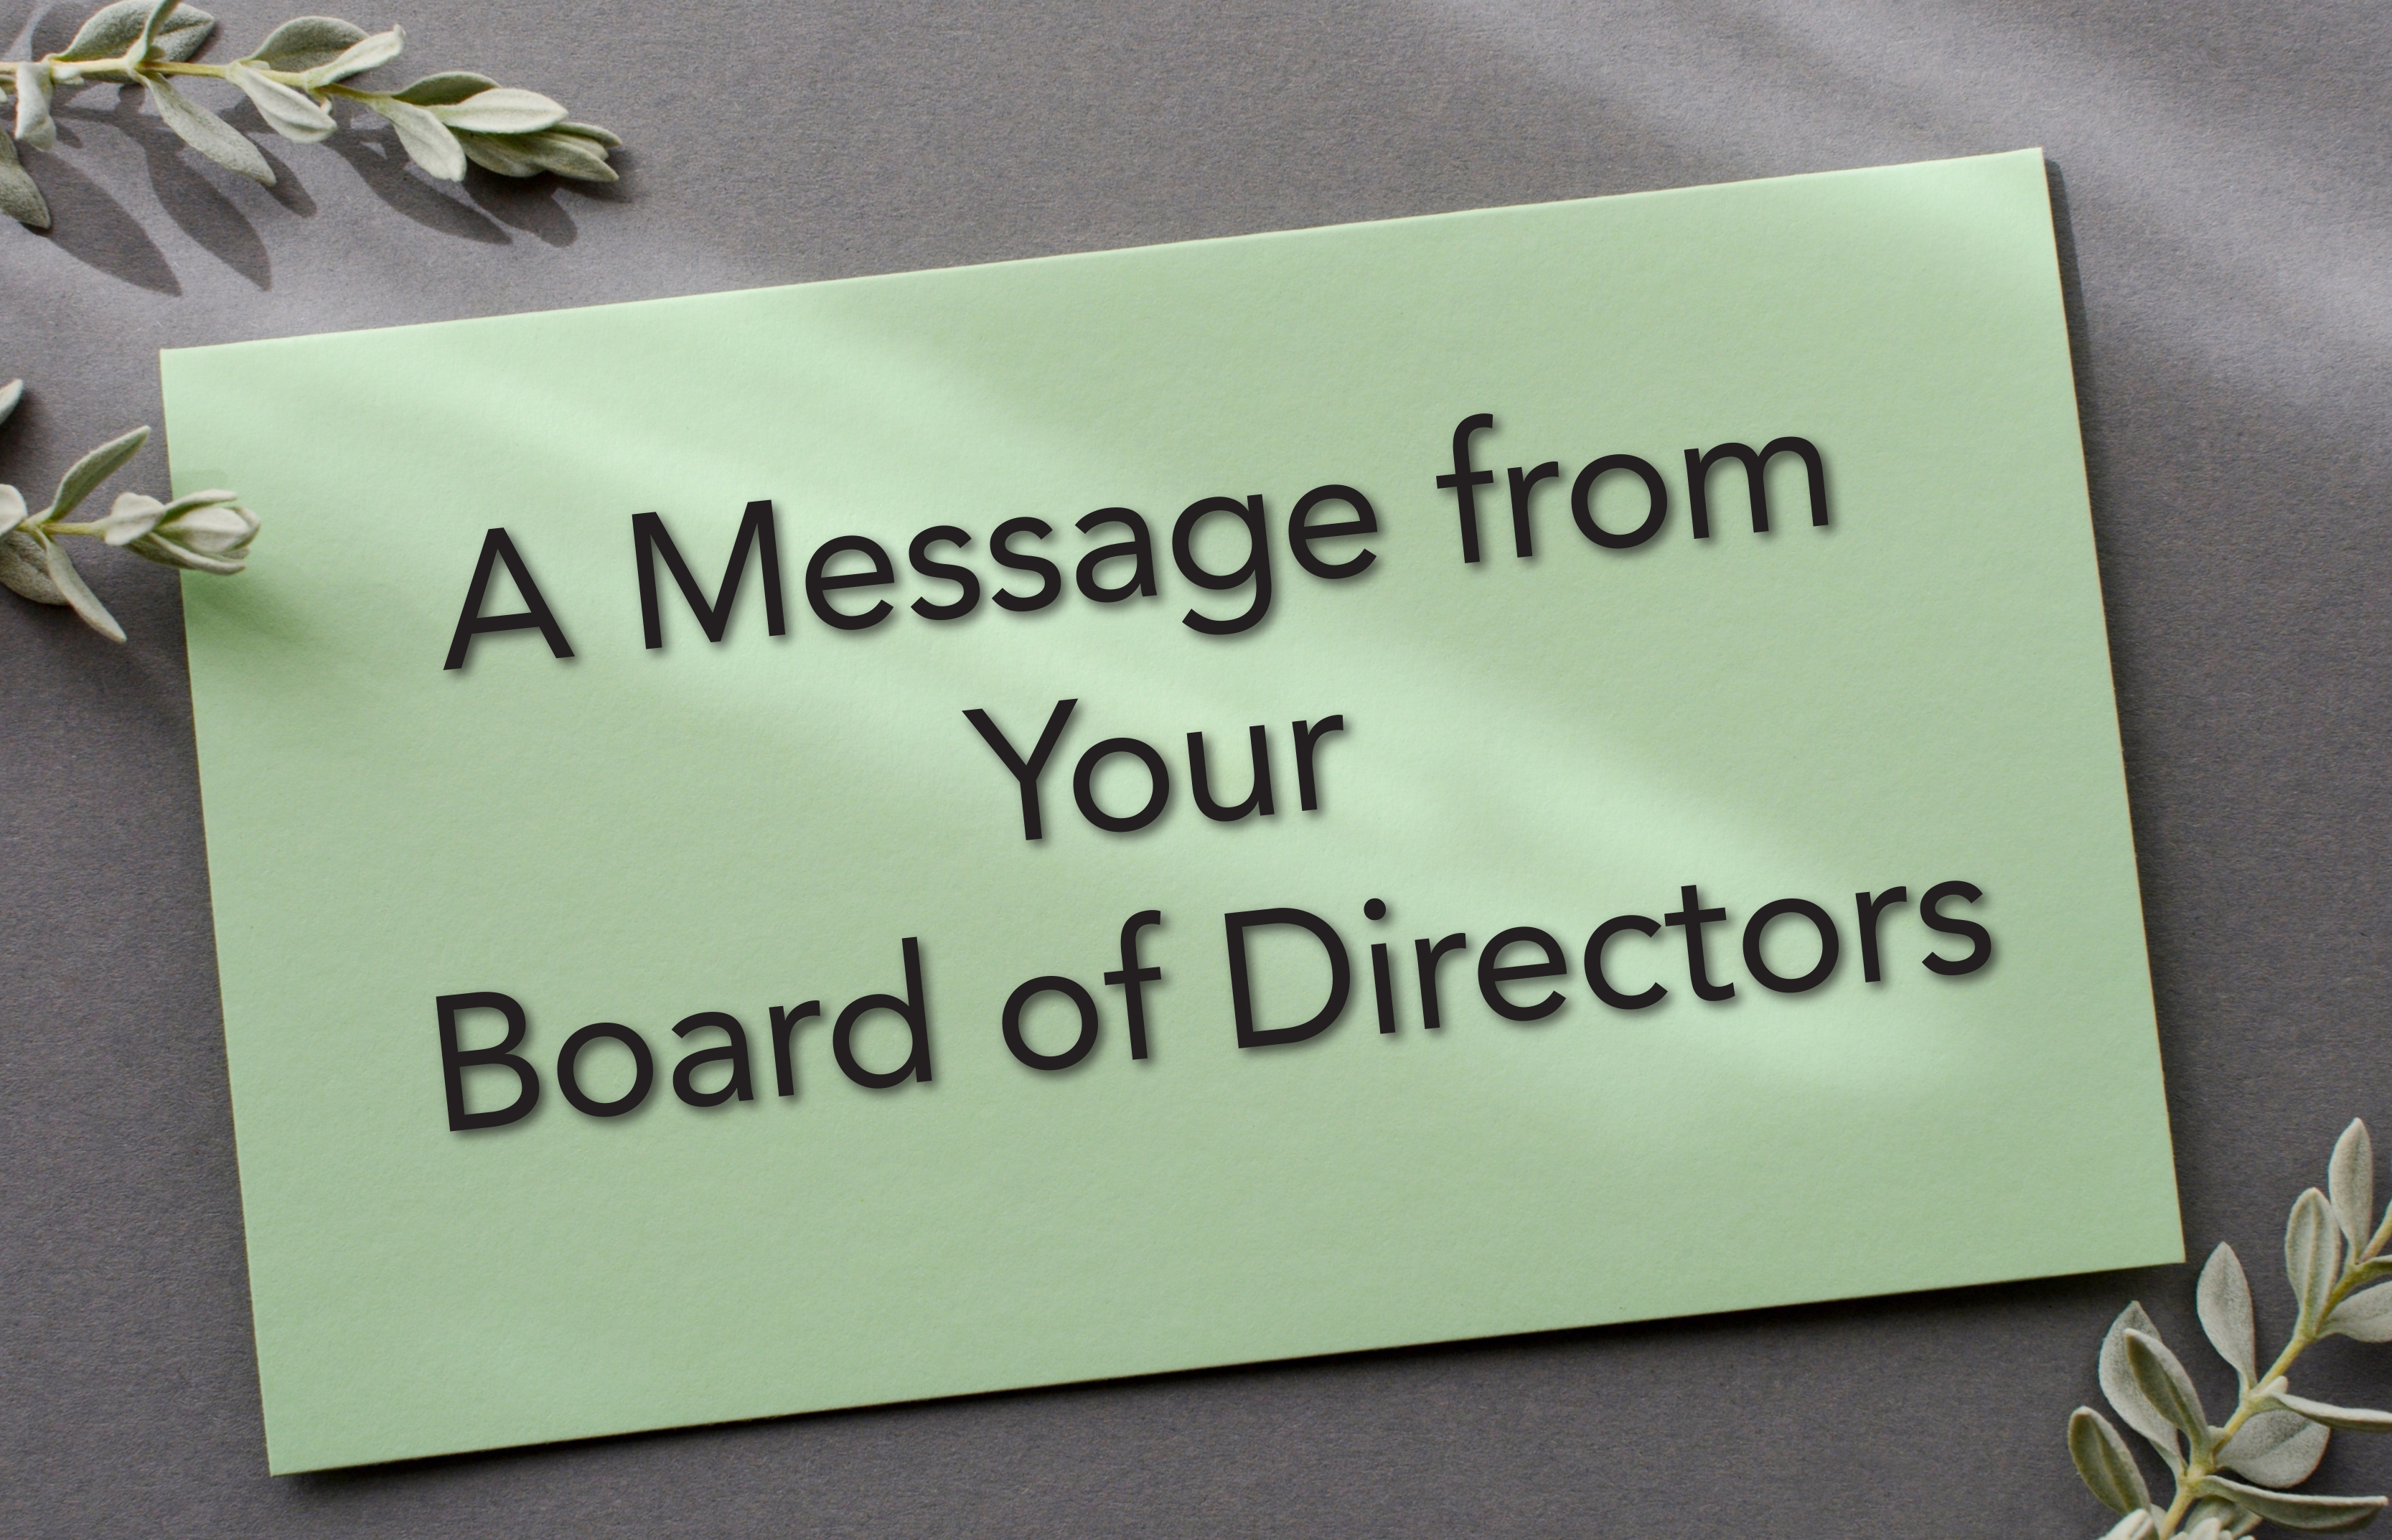 Message from Your Board of Directors